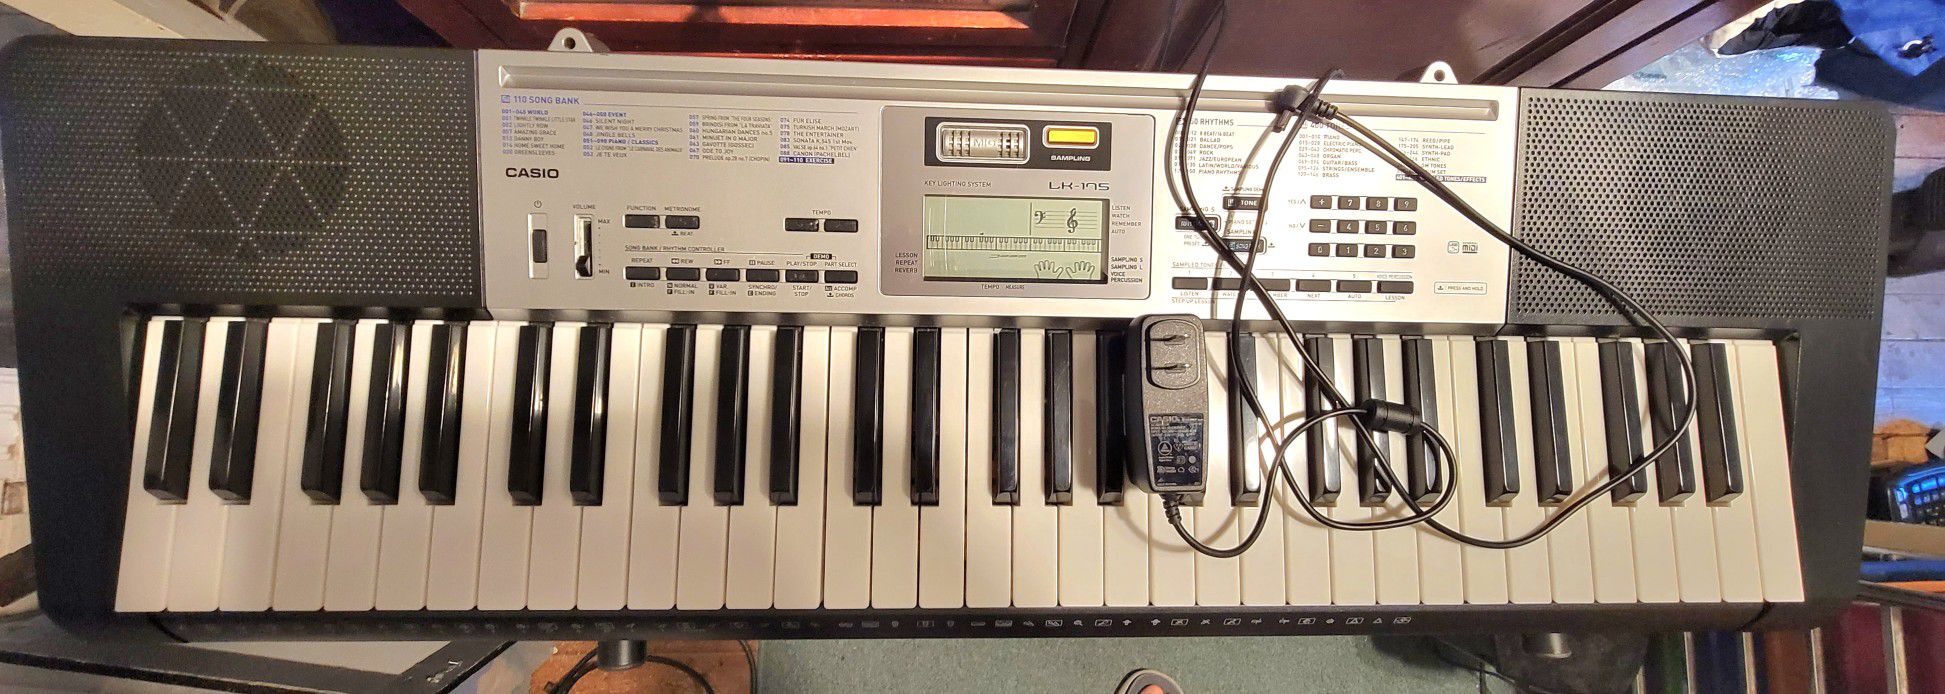 Casio 61 Full size Keyboard with Sampling onboard recording Mic/or jack lighted key learning F.U.N